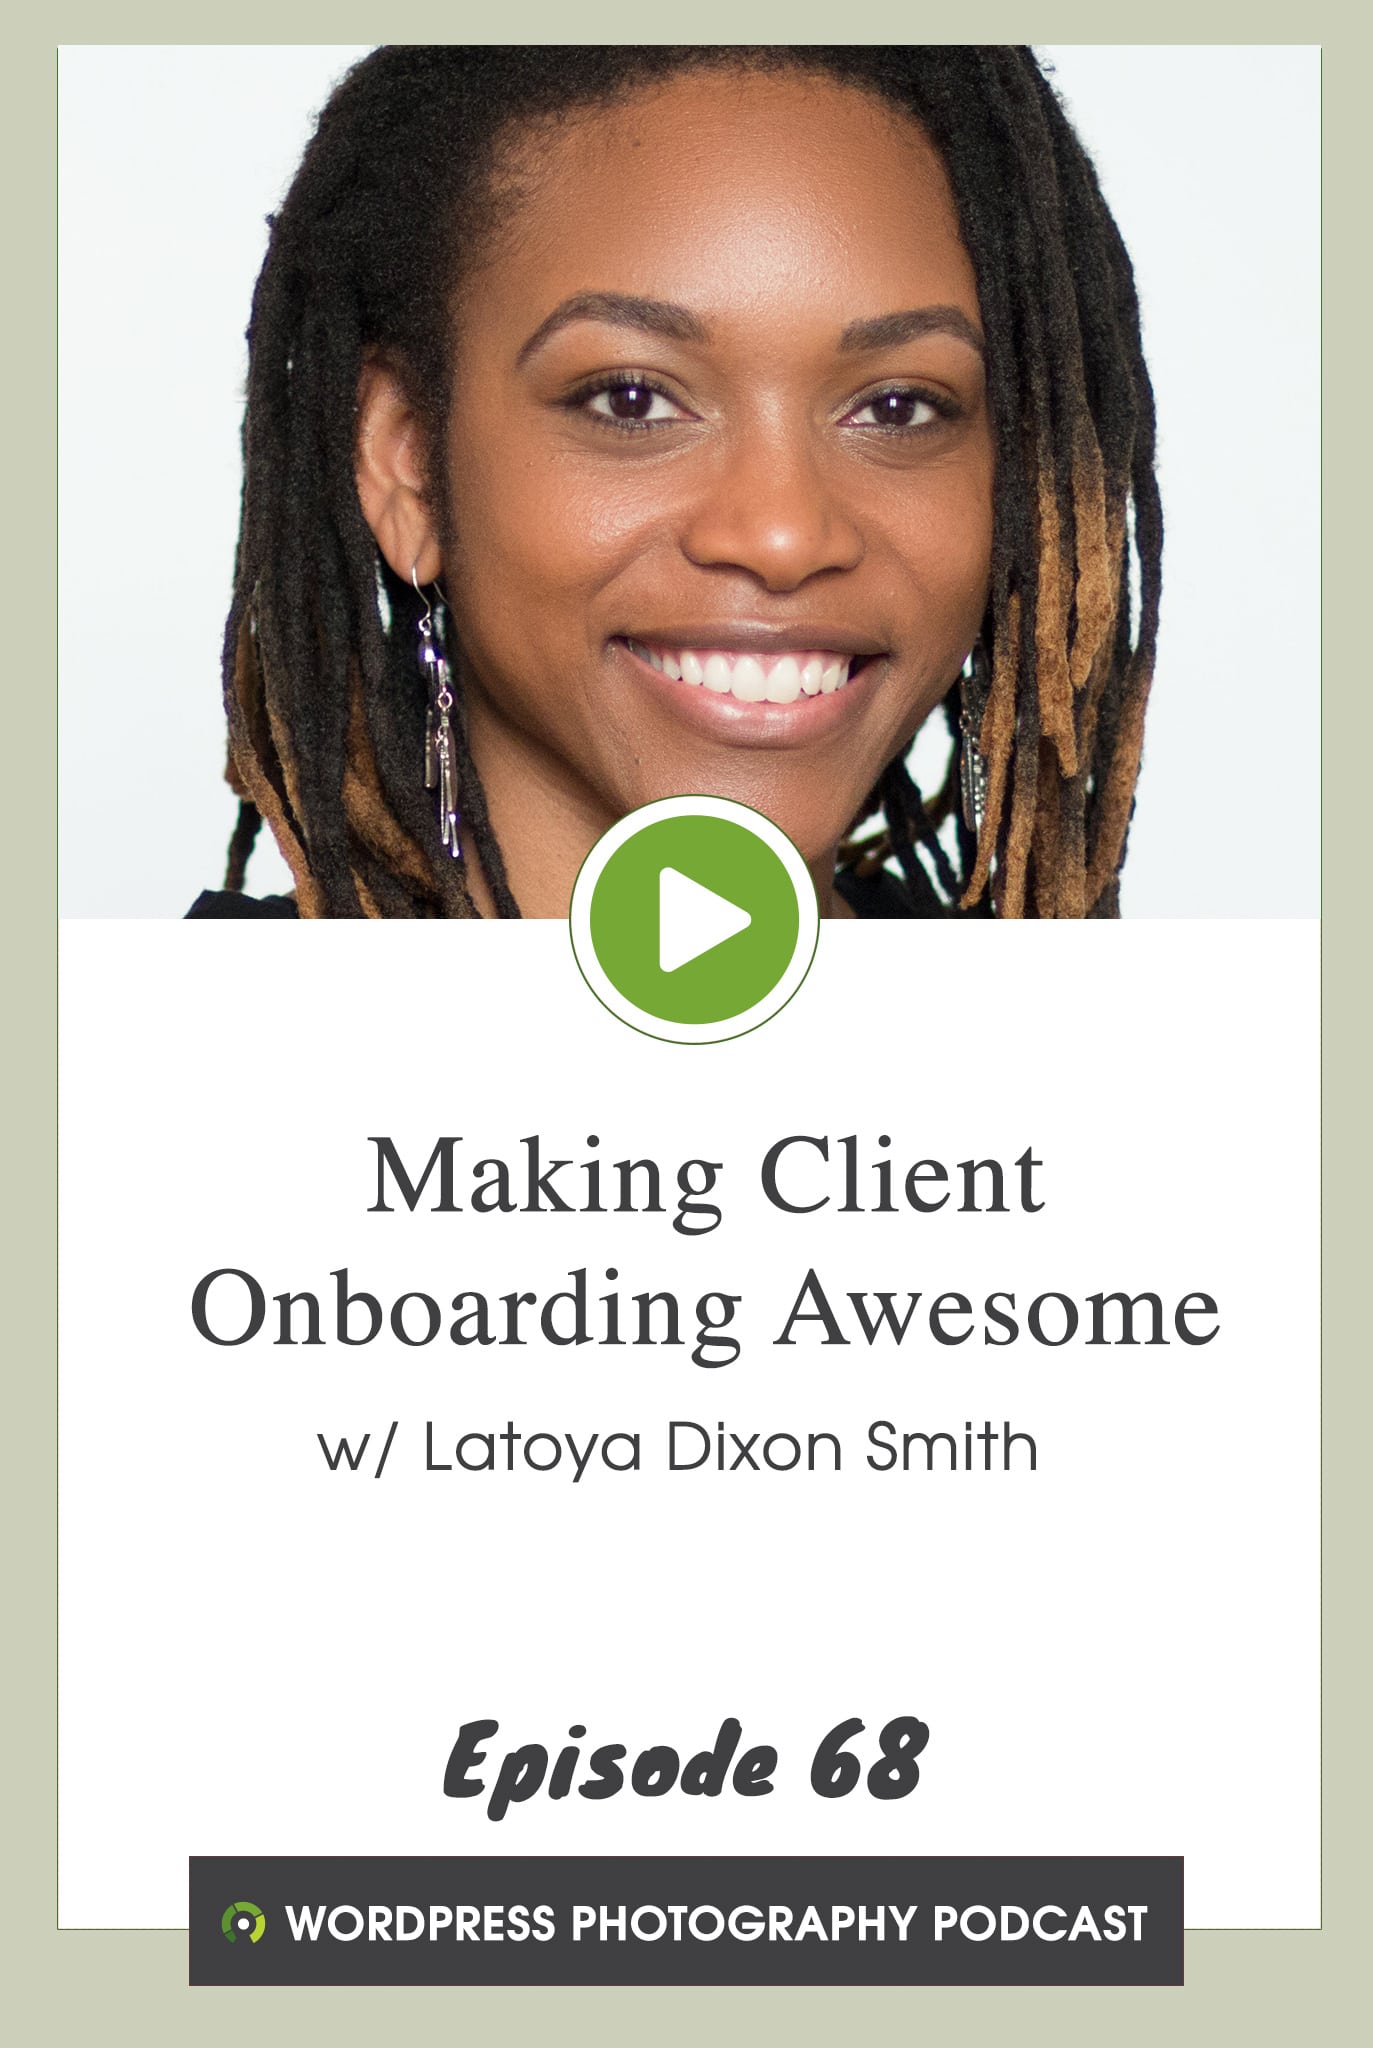 Episode 68 – Making Client Onboarding Awesome w/ Latoya Dixon Smith